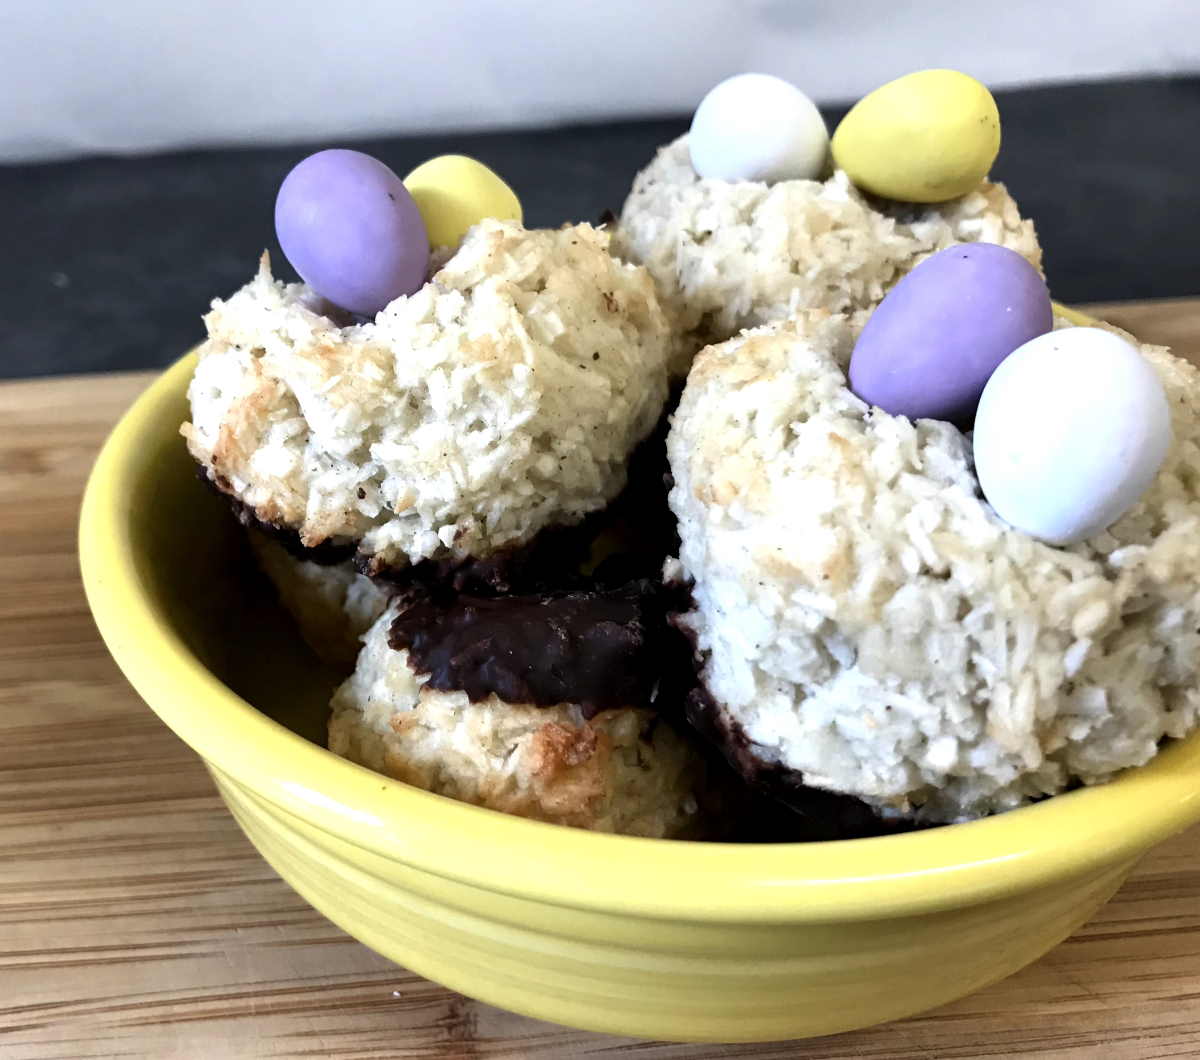 Finished macaroons dipped in dark chocolate with chocolate eggs on top in a yellow bowl